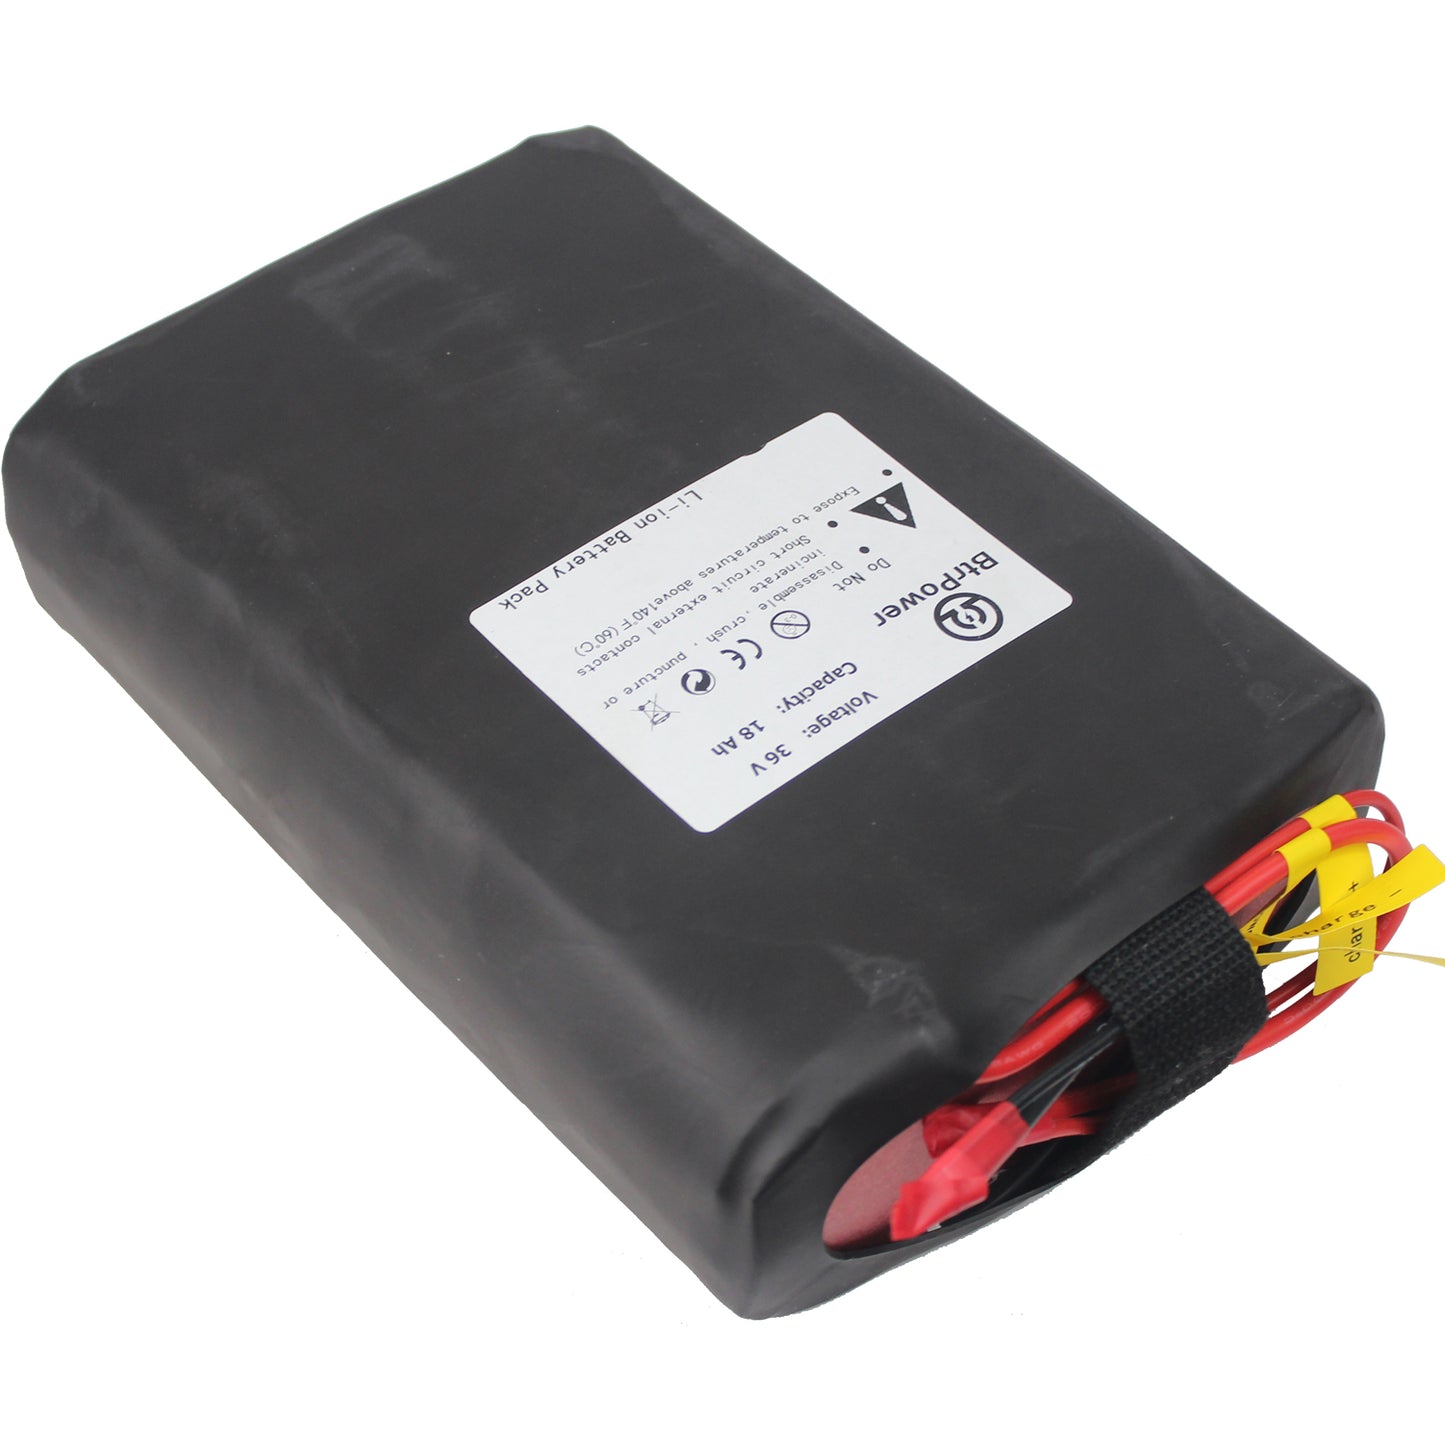 BtrPower Ebike Battery 36V 18AH Li-ion Battery Pack with 3A Charger, 30A BMS